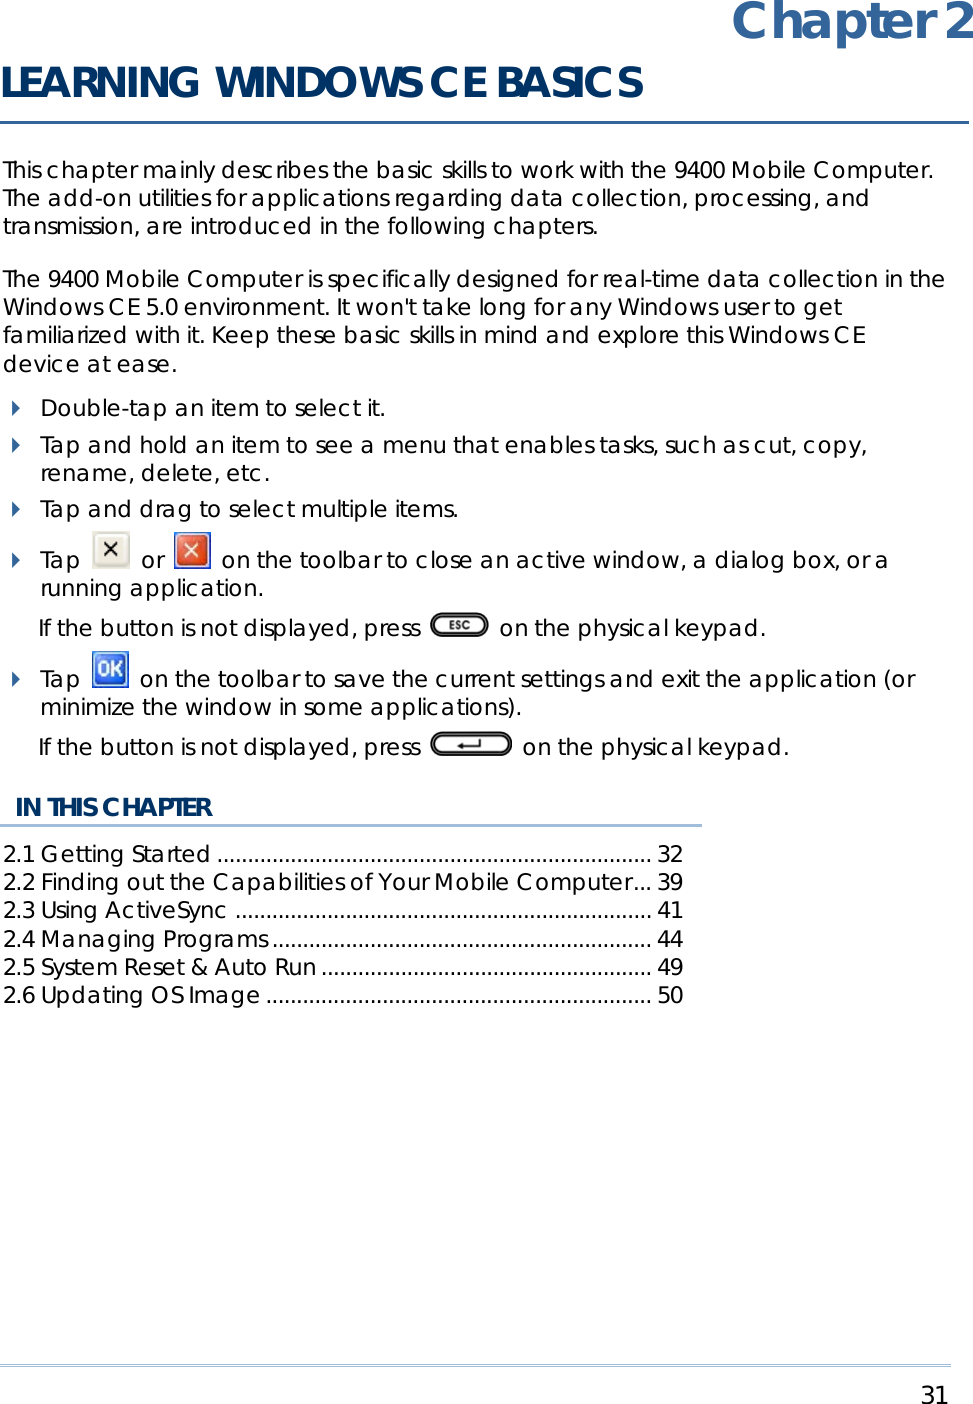     31   This chapter mainly describes the basic skills to work with the 9400 Mobile Computer. The add-on utilities for applications regarding data collection, processing, and transmission, are introduced in the following chapters.  The 9400 Mobile Computer is specifically designed for real-time data collection in the Windows CE 5.0 environment. It won&apos;t take long for any Windows user to get familiarized with it. Keep these basic skills in mind and explore this Windows CE device at ease.  Double-tap an item to select it.  Tap and hold an item to see a menu that enables tasks, such as cut, copy, rename, delete, etc.  Tap and drag to select multiple items.  Tap   or   on the toolbar to close an active window, a dialog box, or a running application.  If the button is not displayed, press    on the physical keypad.  Tap   on the toolbar to save the current settings and exit the application (or minimize the window in some applications).   If the button is not displayed, press   on the physical keypad.   IN THIS CHAPTER 2.1 Getting Started....................................................................... 32 2.2 Finding out the Capabilities of Your Mobile Computer... 39 2.3 Using ActiveSync .................................................................... 41 2.4 Managing Programs .............................................................. 44 2.5 System Reset &amp; Auto Run ...................................................... 49 2.6 Updating OS Image ............................................................... 50   Chapter 2 LEARNING WINDOWS CE BASICS 